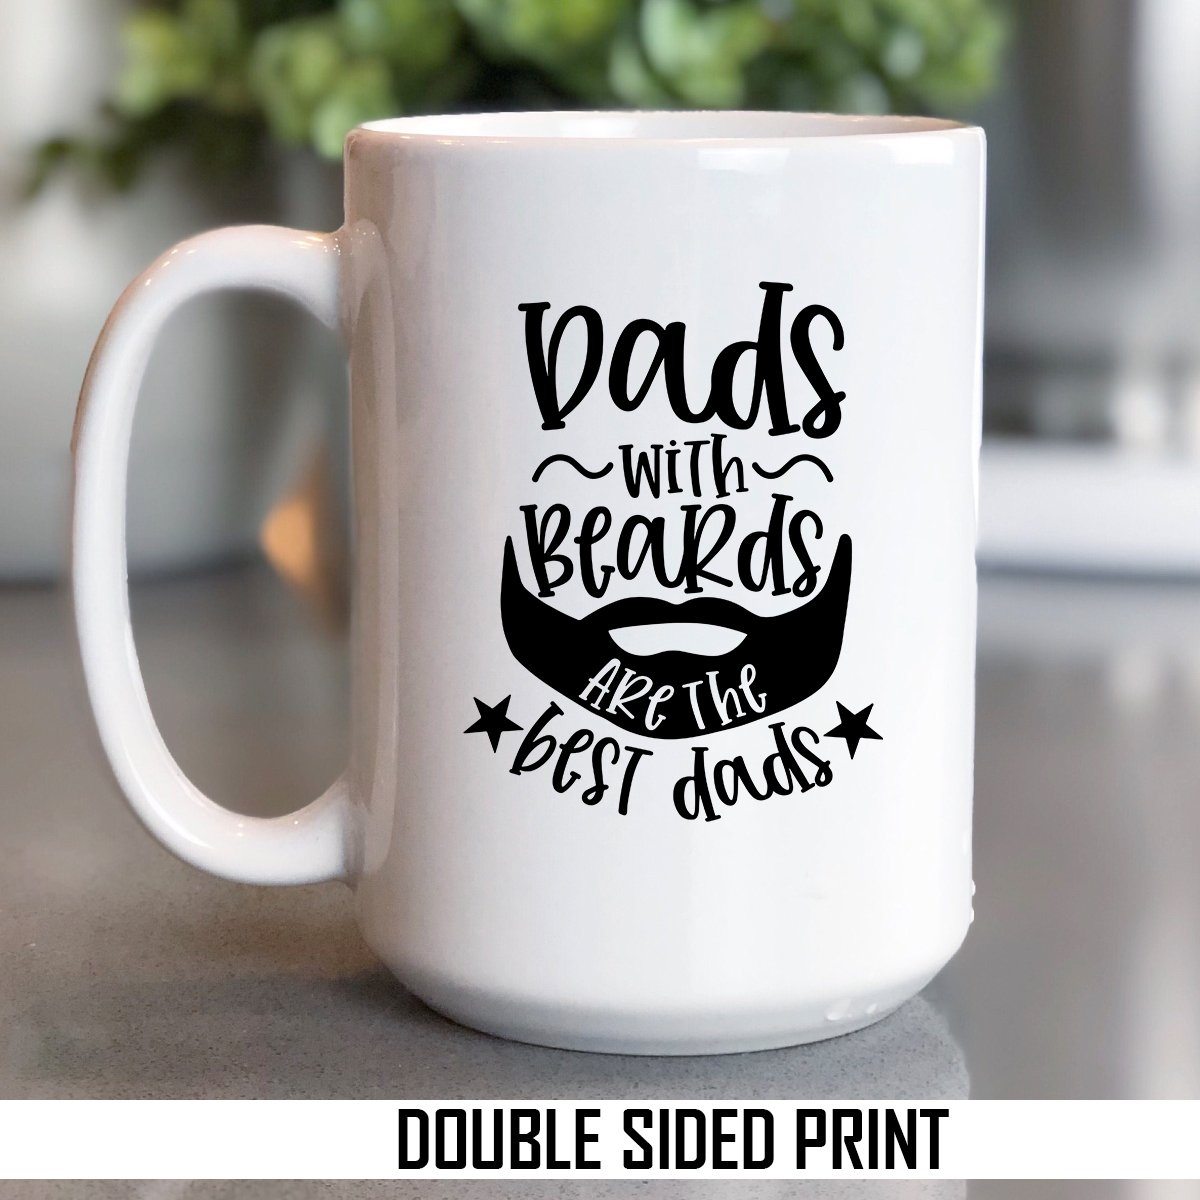 Dads With Beards Are The Best Dads Double Sided Printed Mug